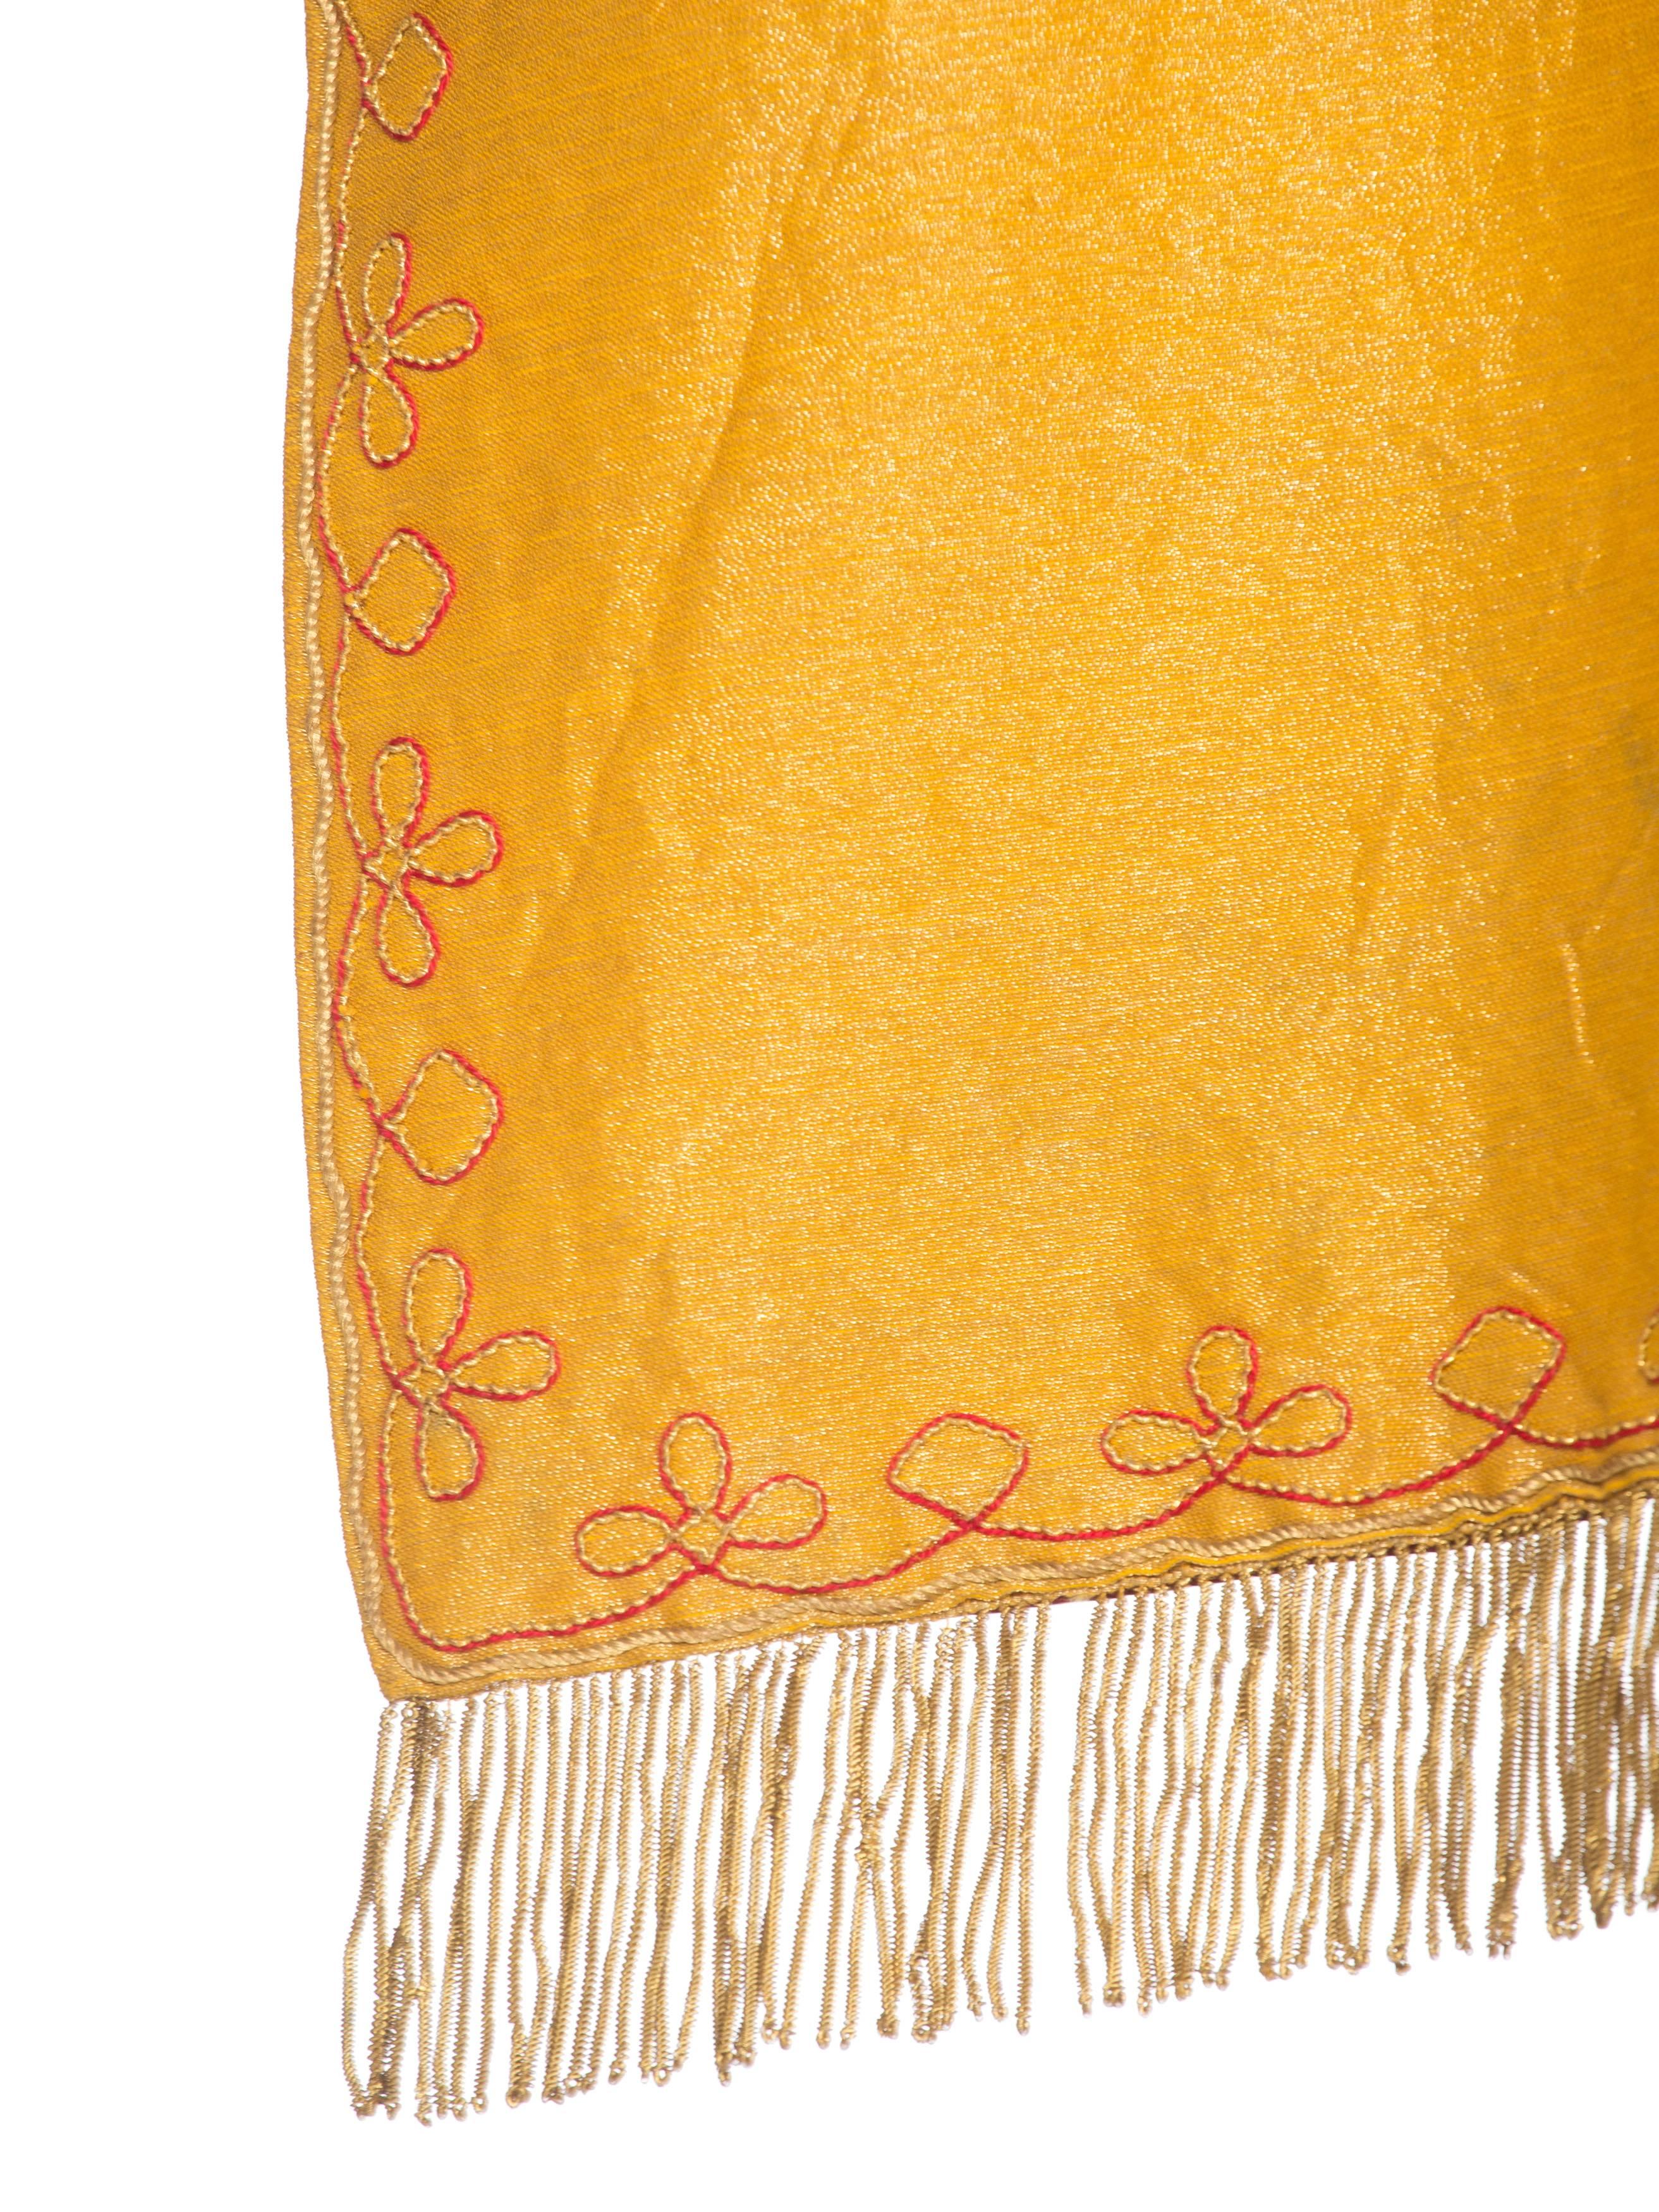 Victorian Gold & Cotton Embroidered Catholic Mantle Cape With Fringe For Sale 4